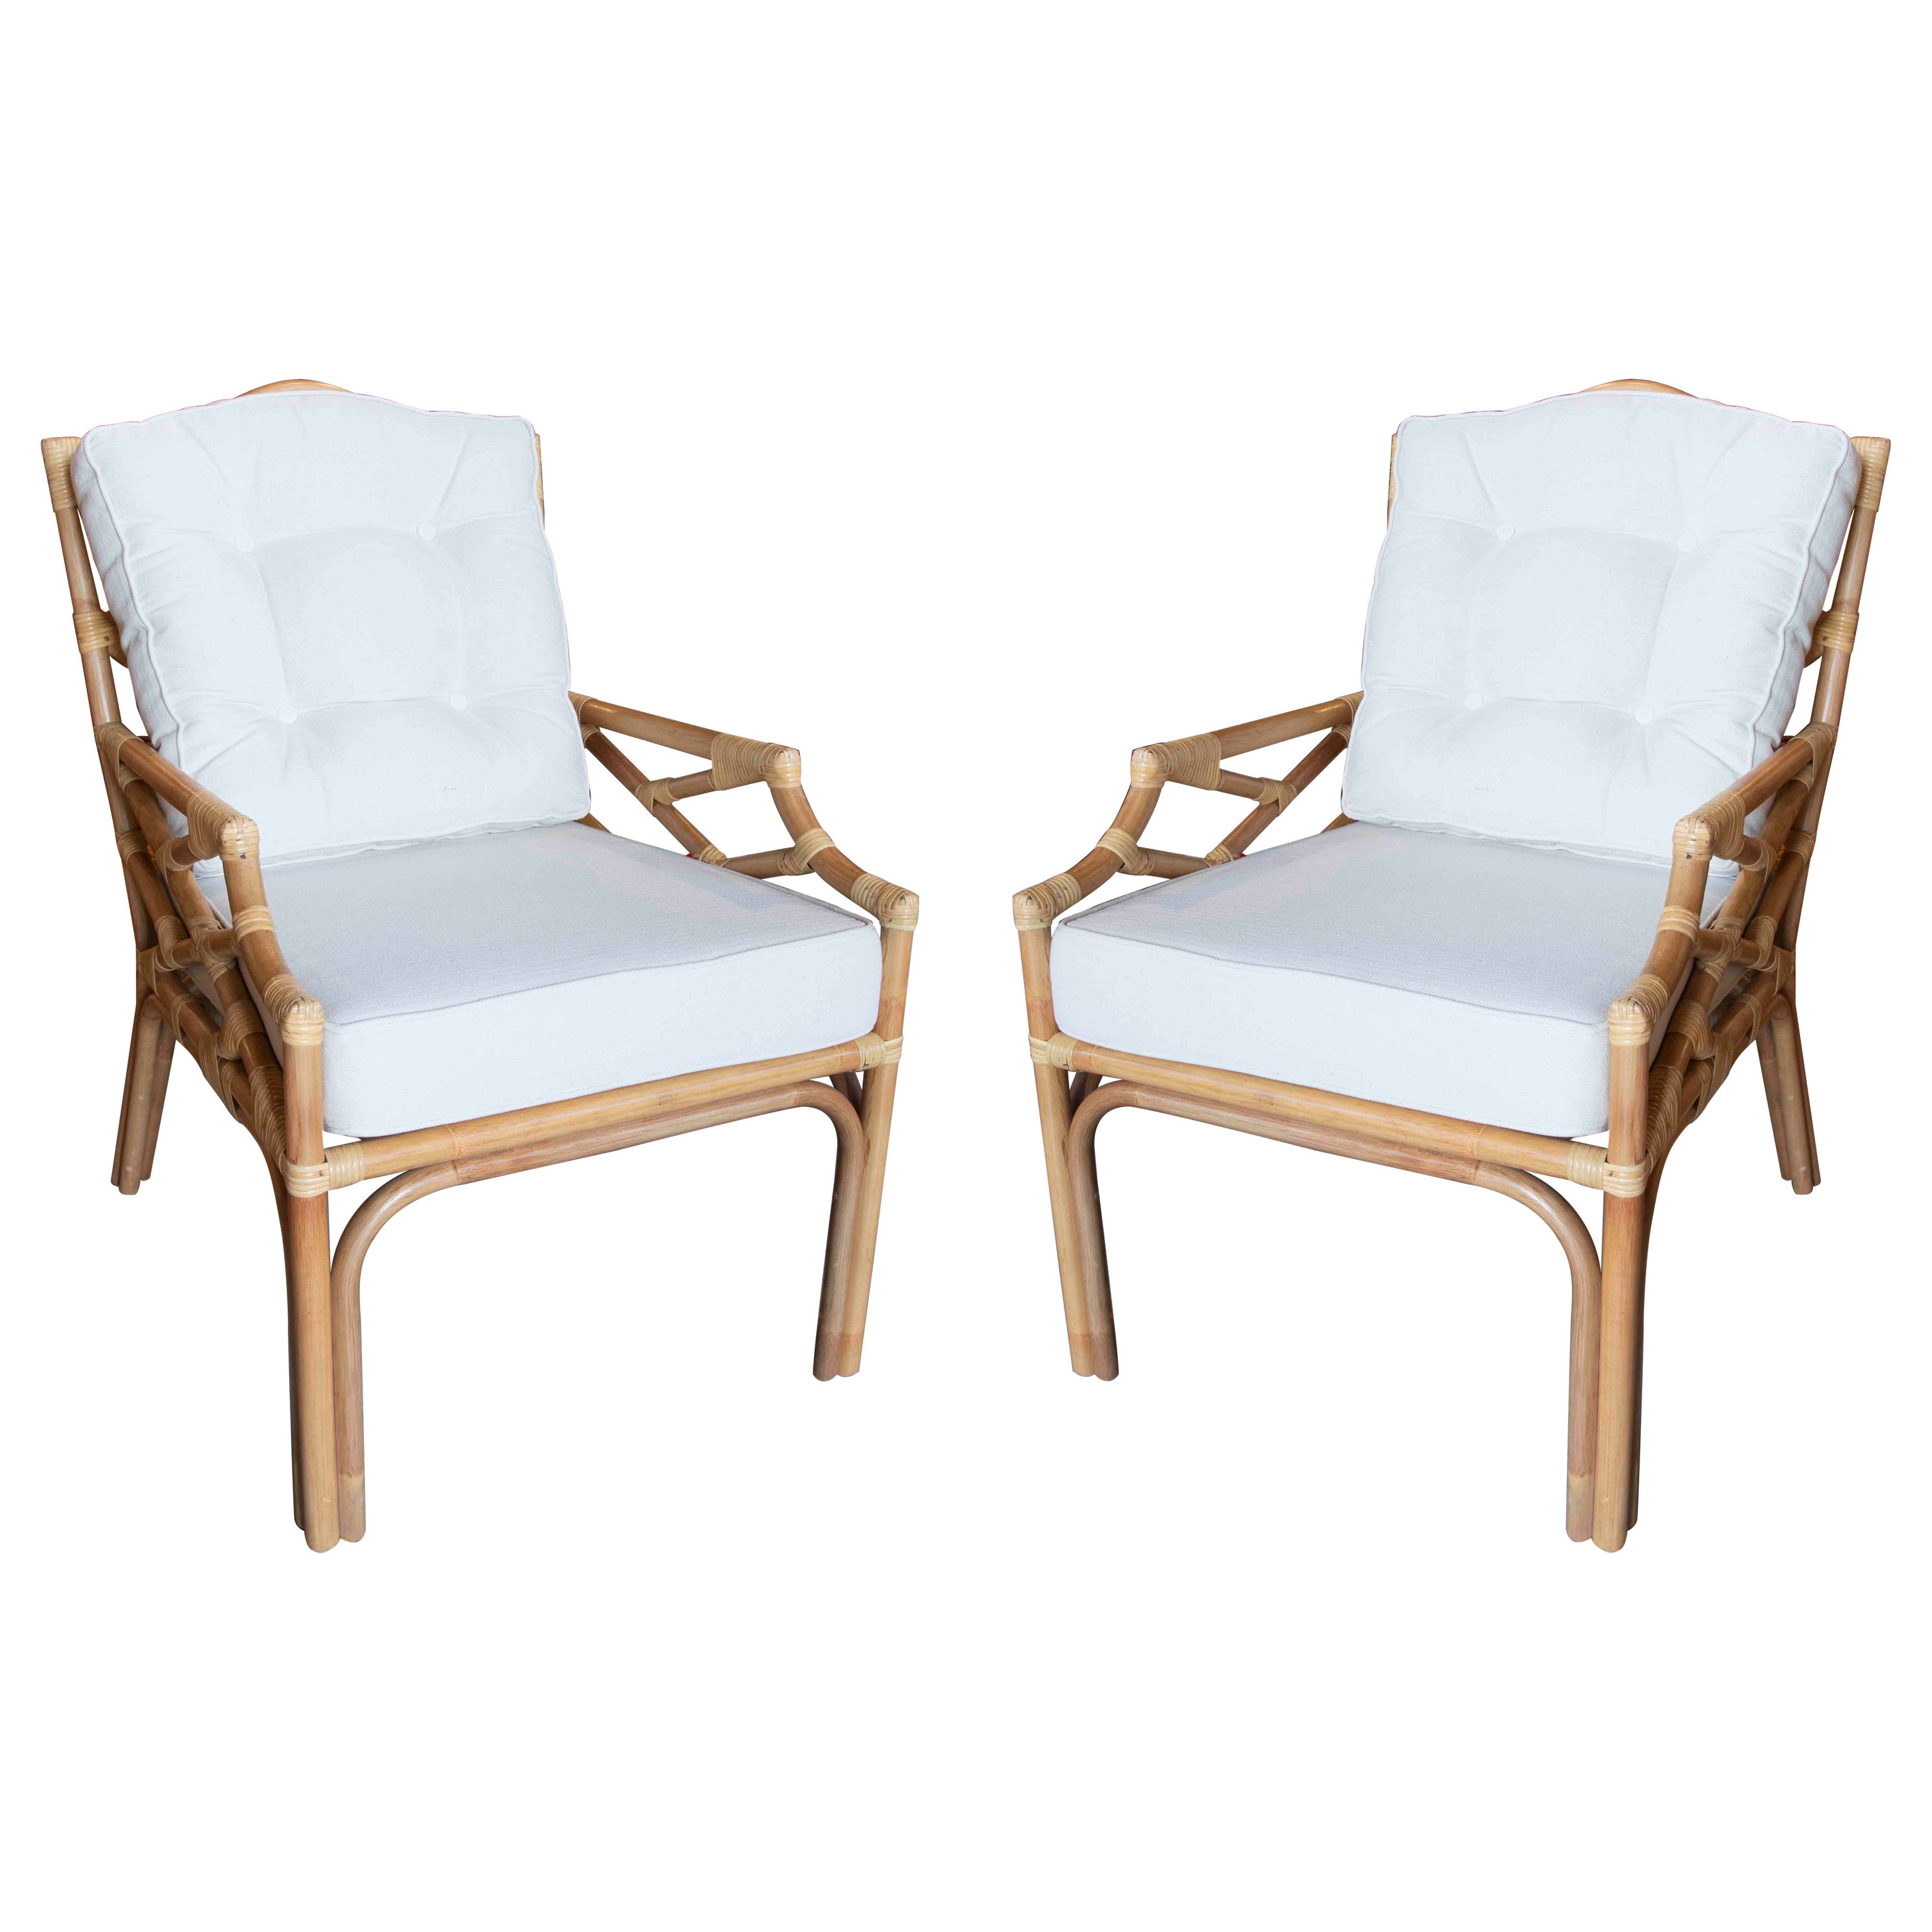 Pair of Handmade Bamboo Armchairs with Beige Cushions For Sale